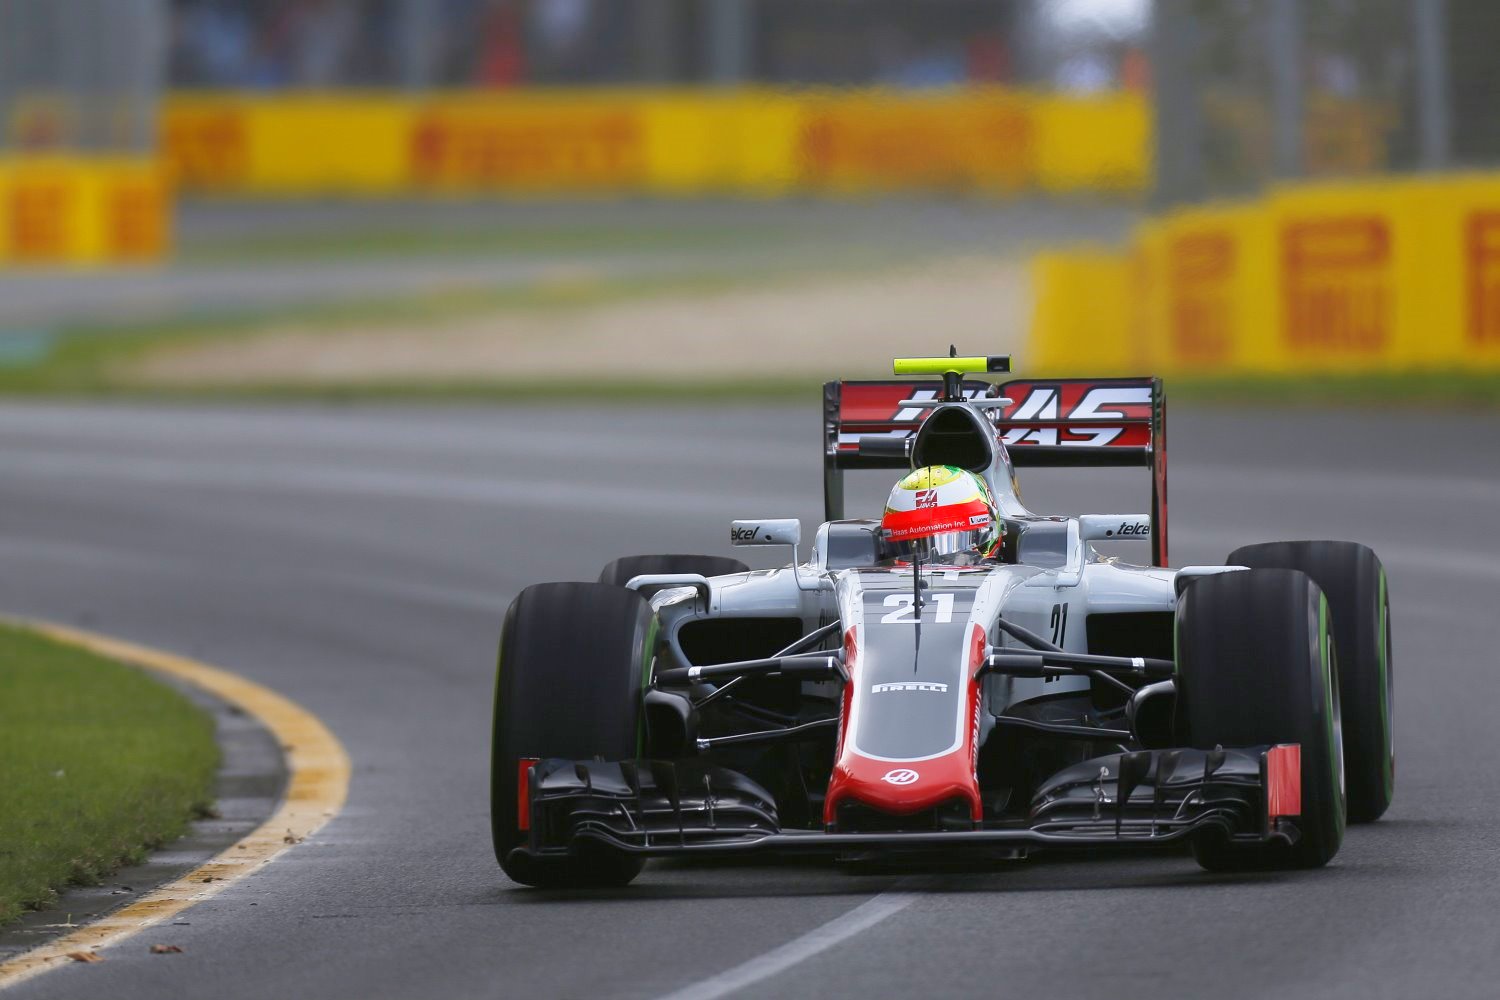 The success of the Haas F1 team should encourage other teams to join F1